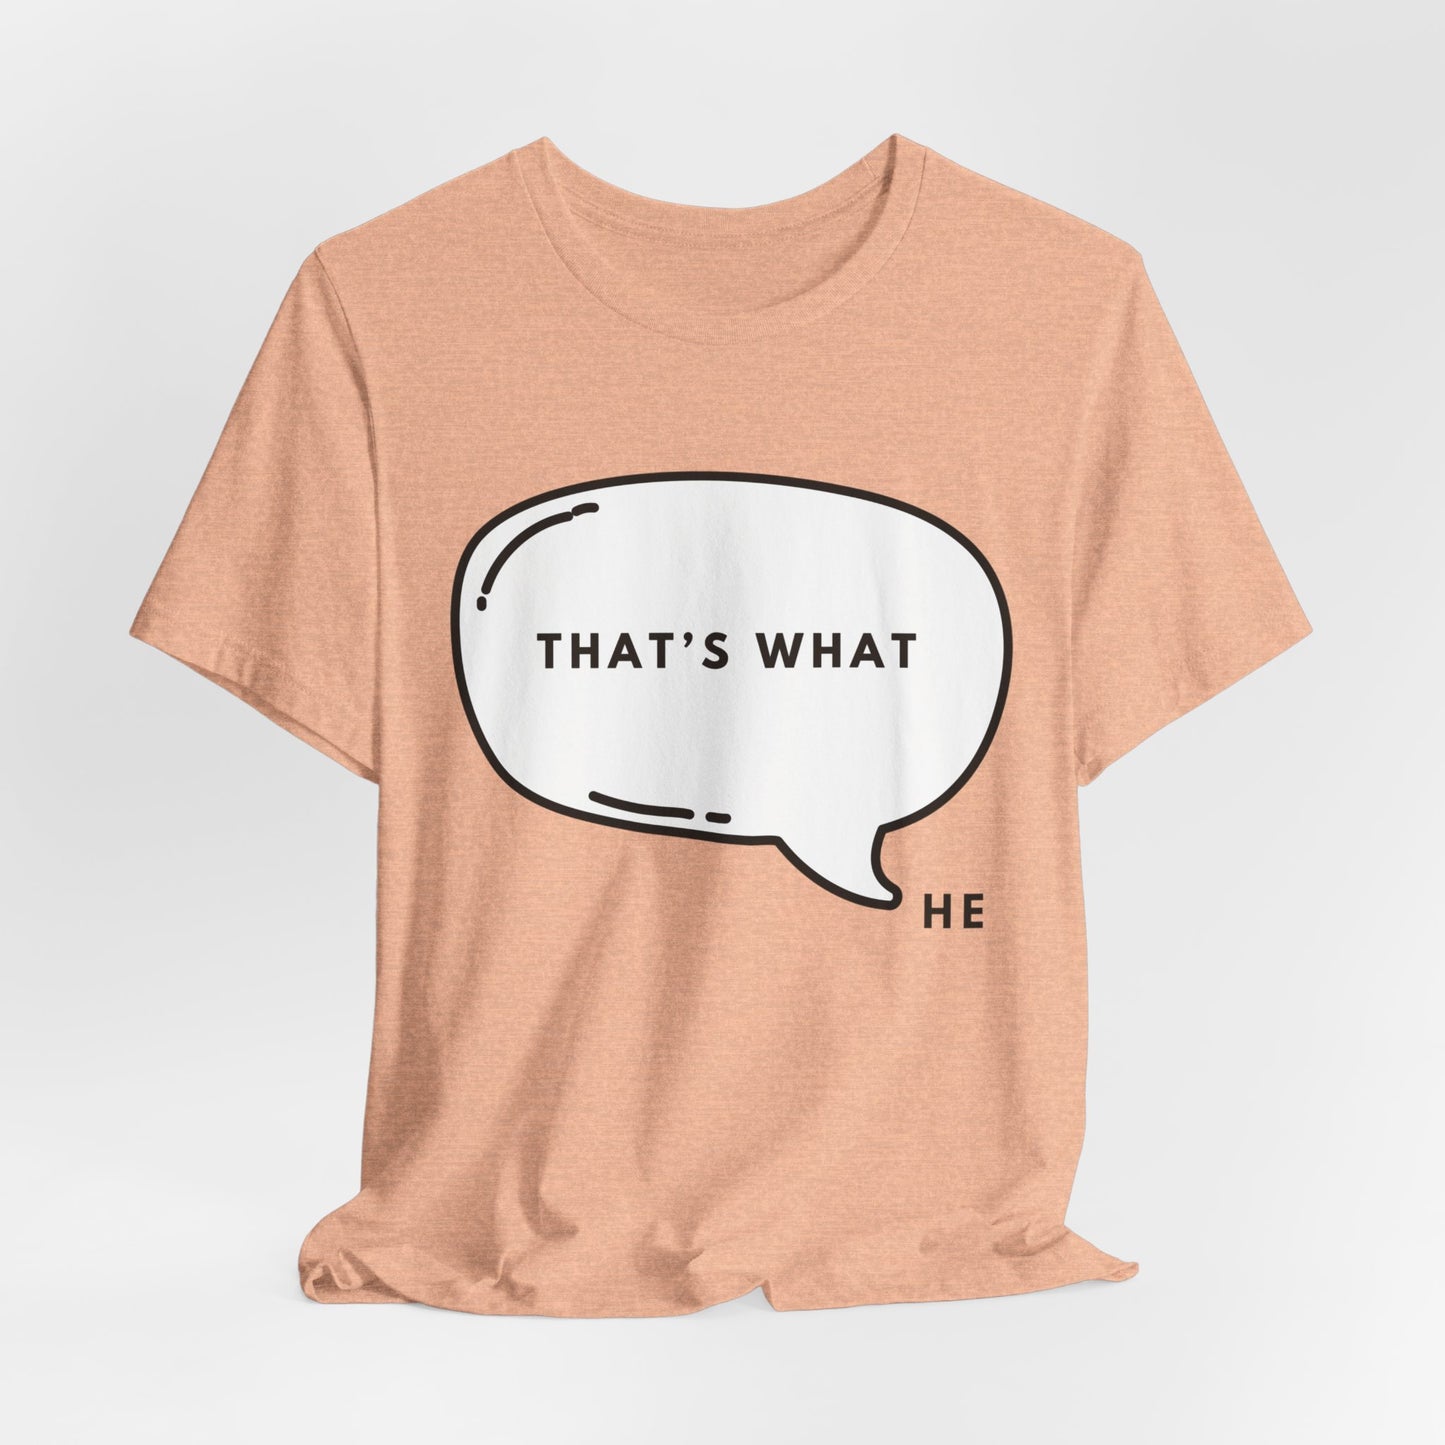 That's What HE Said T-Shirt - The Office